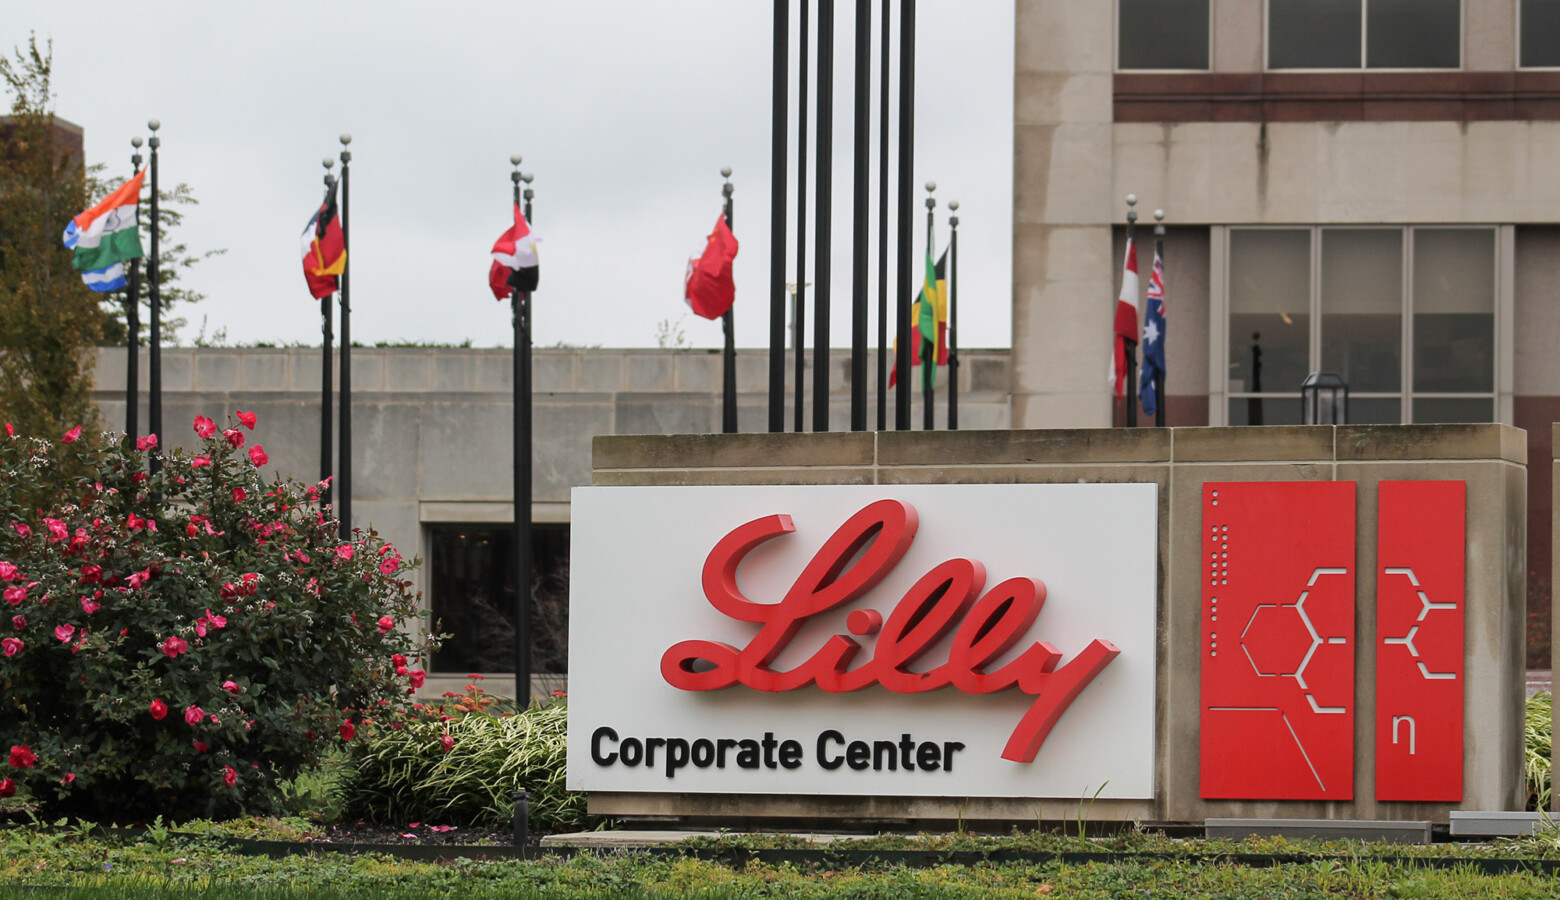 Eli Lilly's Corporate Headquarters in Indianapolis. The company has agreed to supply an initial 300,000 doses of its COVID-19 antibody drug to the U.S. government to be distributed across the country. (Lauren Chapman/IPB News)